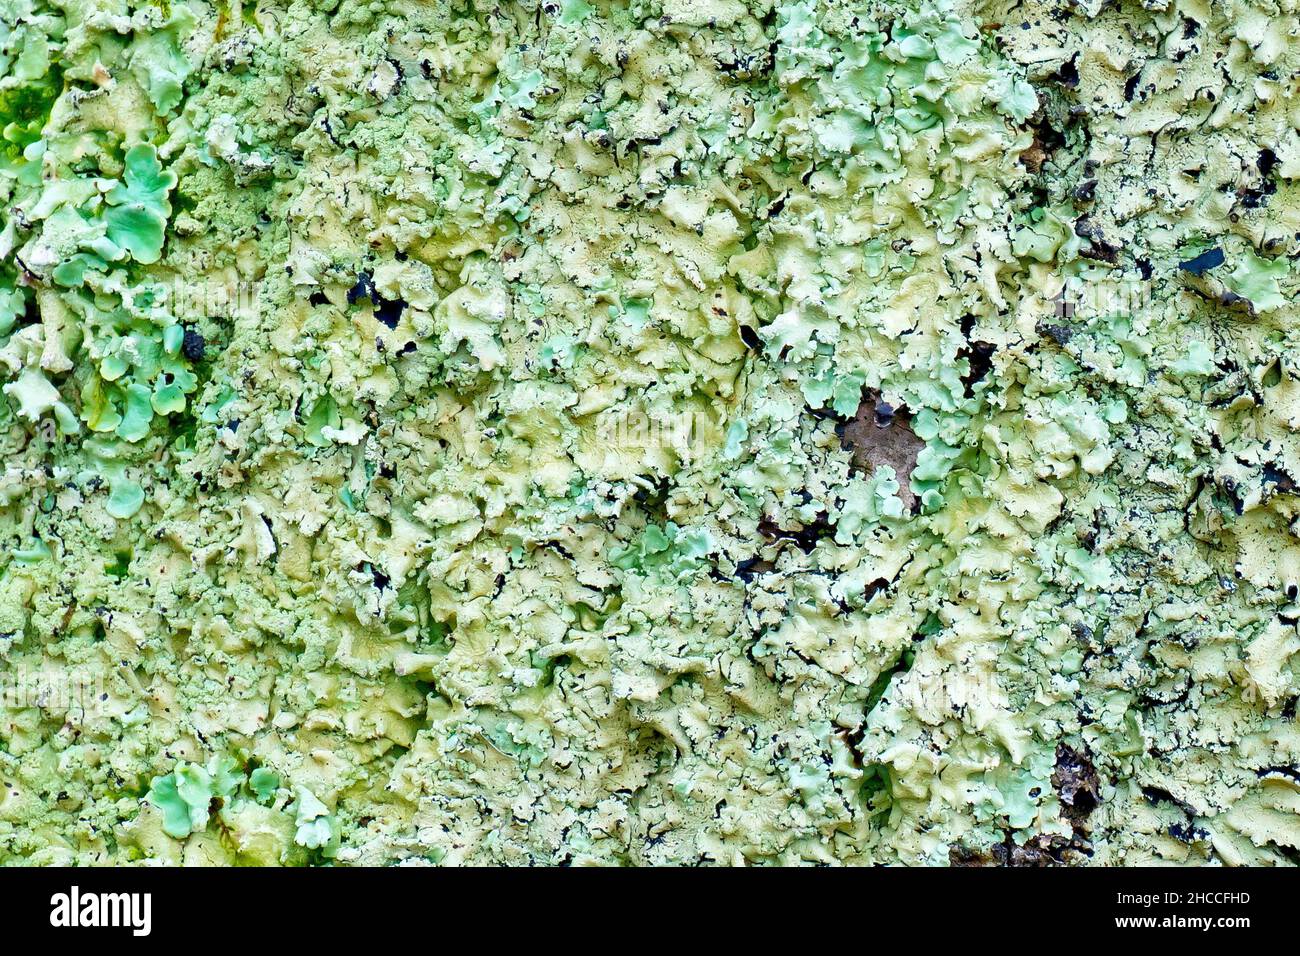 Lichen, most likely Common Greenshield Lichen (flavoparmelia caperata), close up of a large plaque growing across the trunk of a mature Ash tree. Stock Photo